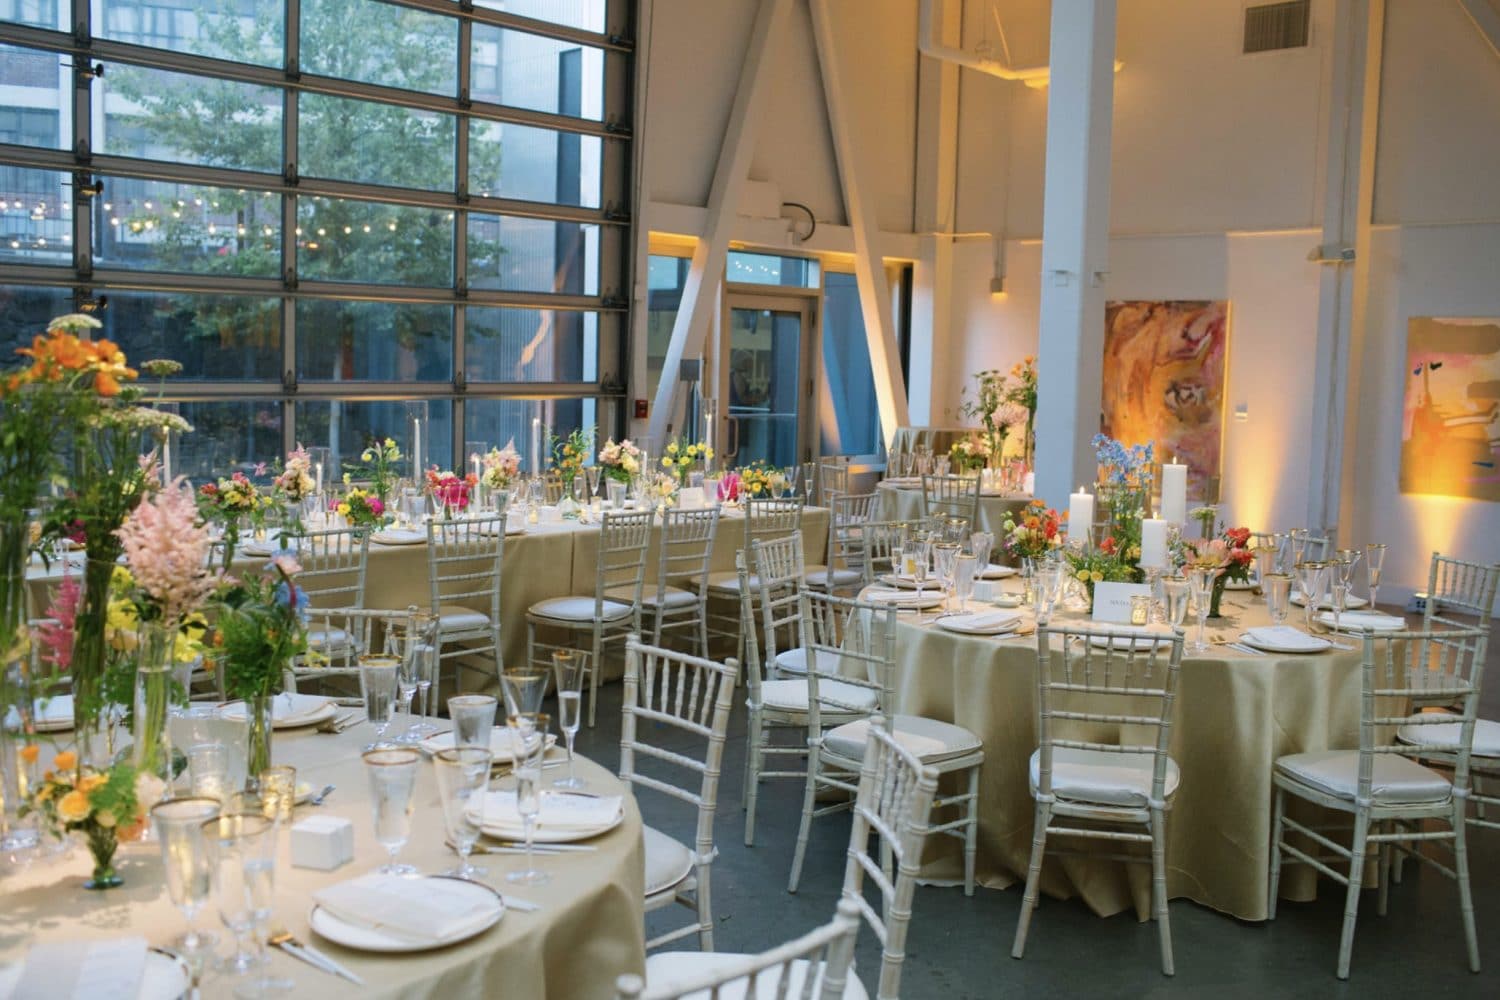 Spring Wedding at the Artist For Humanity EpiCenter